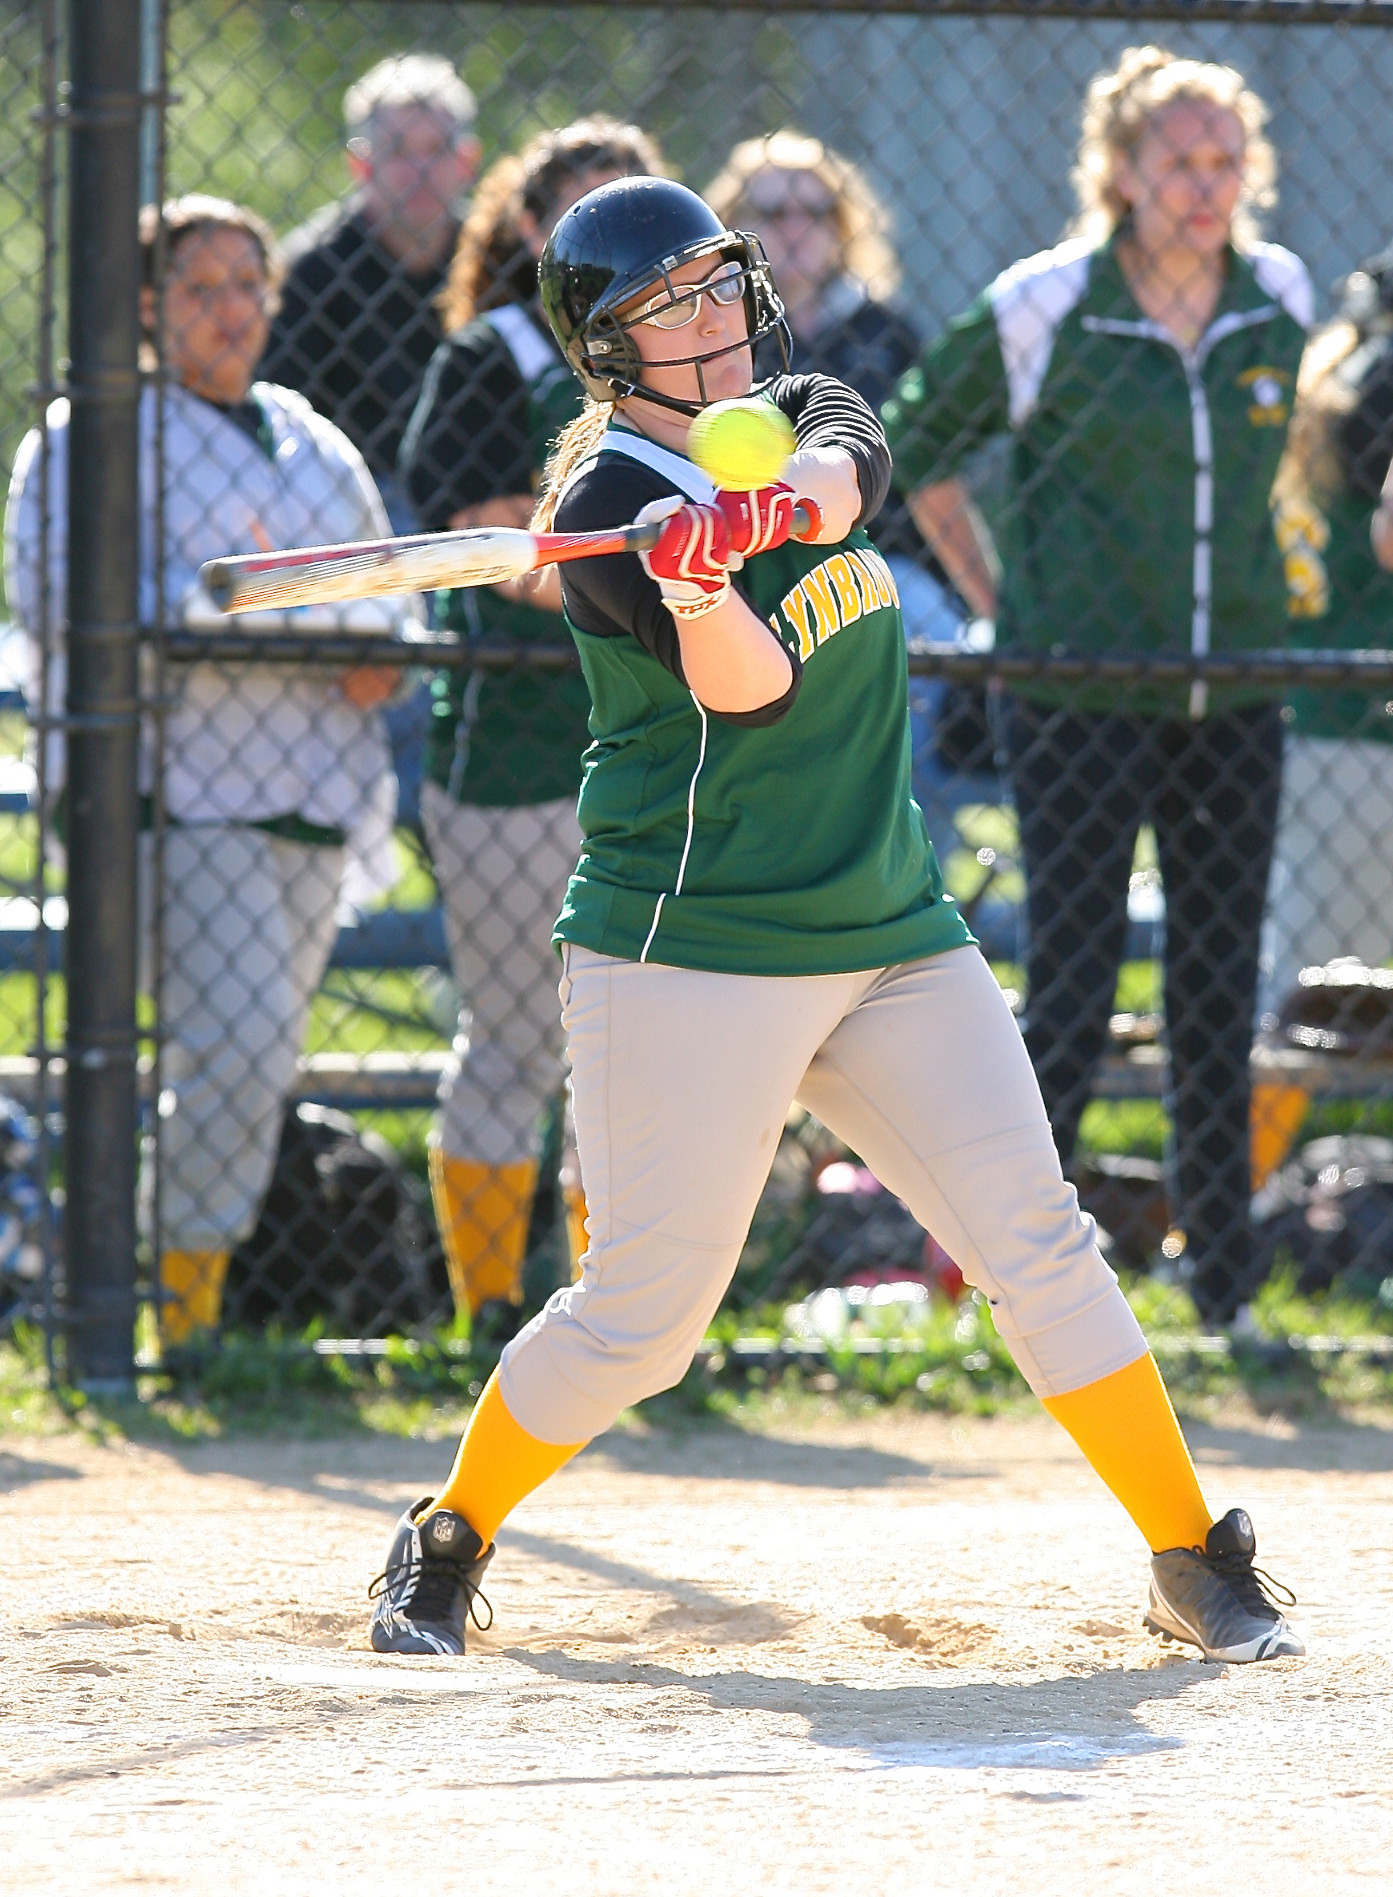 Lynbrook's Erin Connors connects for a hit during the team's loss at Malverne on May 1.